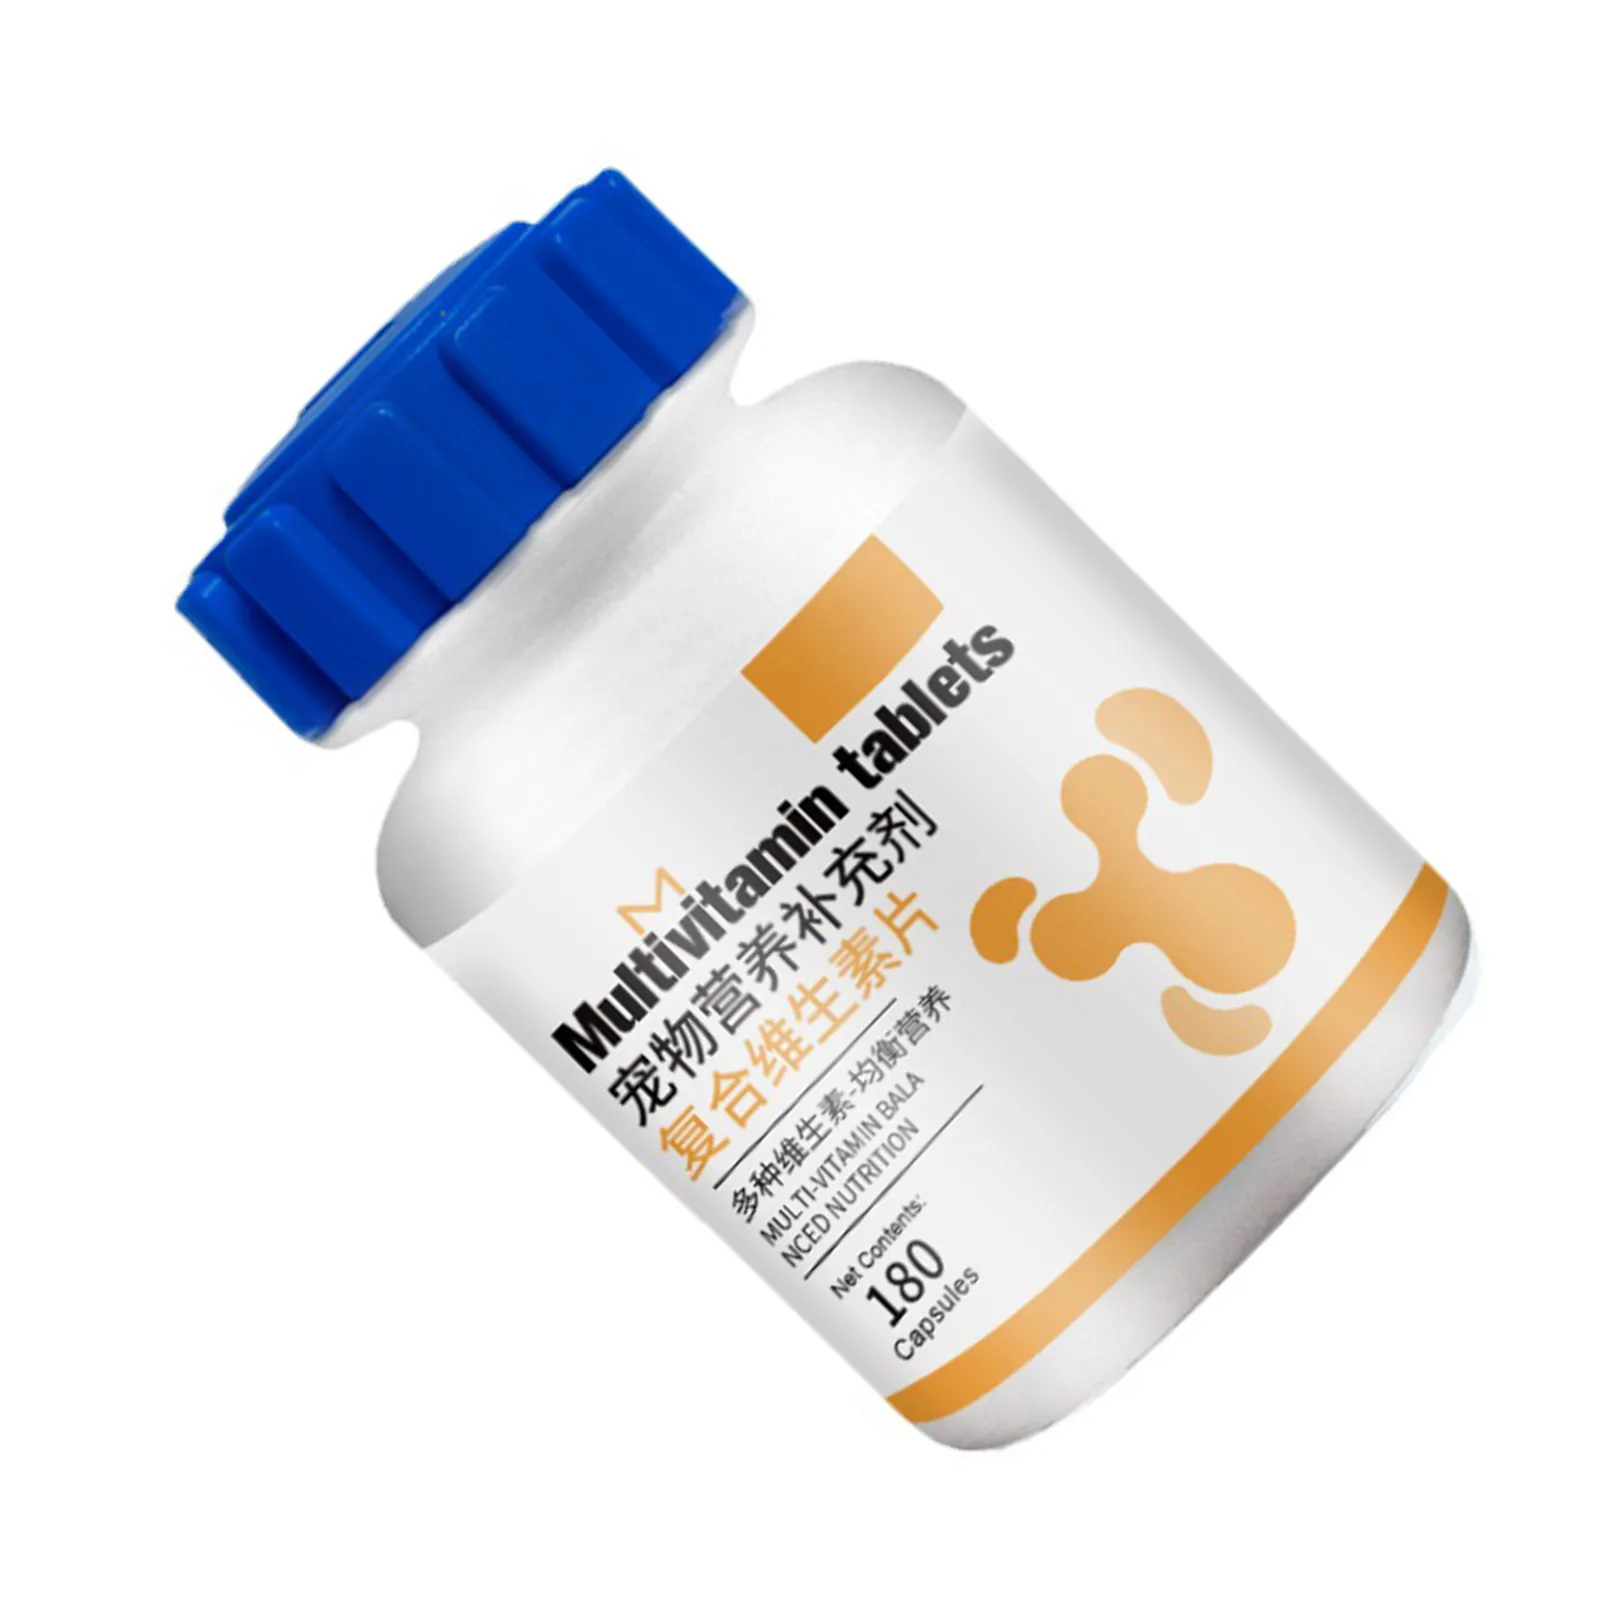 

Dog Multivitamin Natural Daily Vitamin and Mineral Nutritional Supplement for Dogs of All Ages